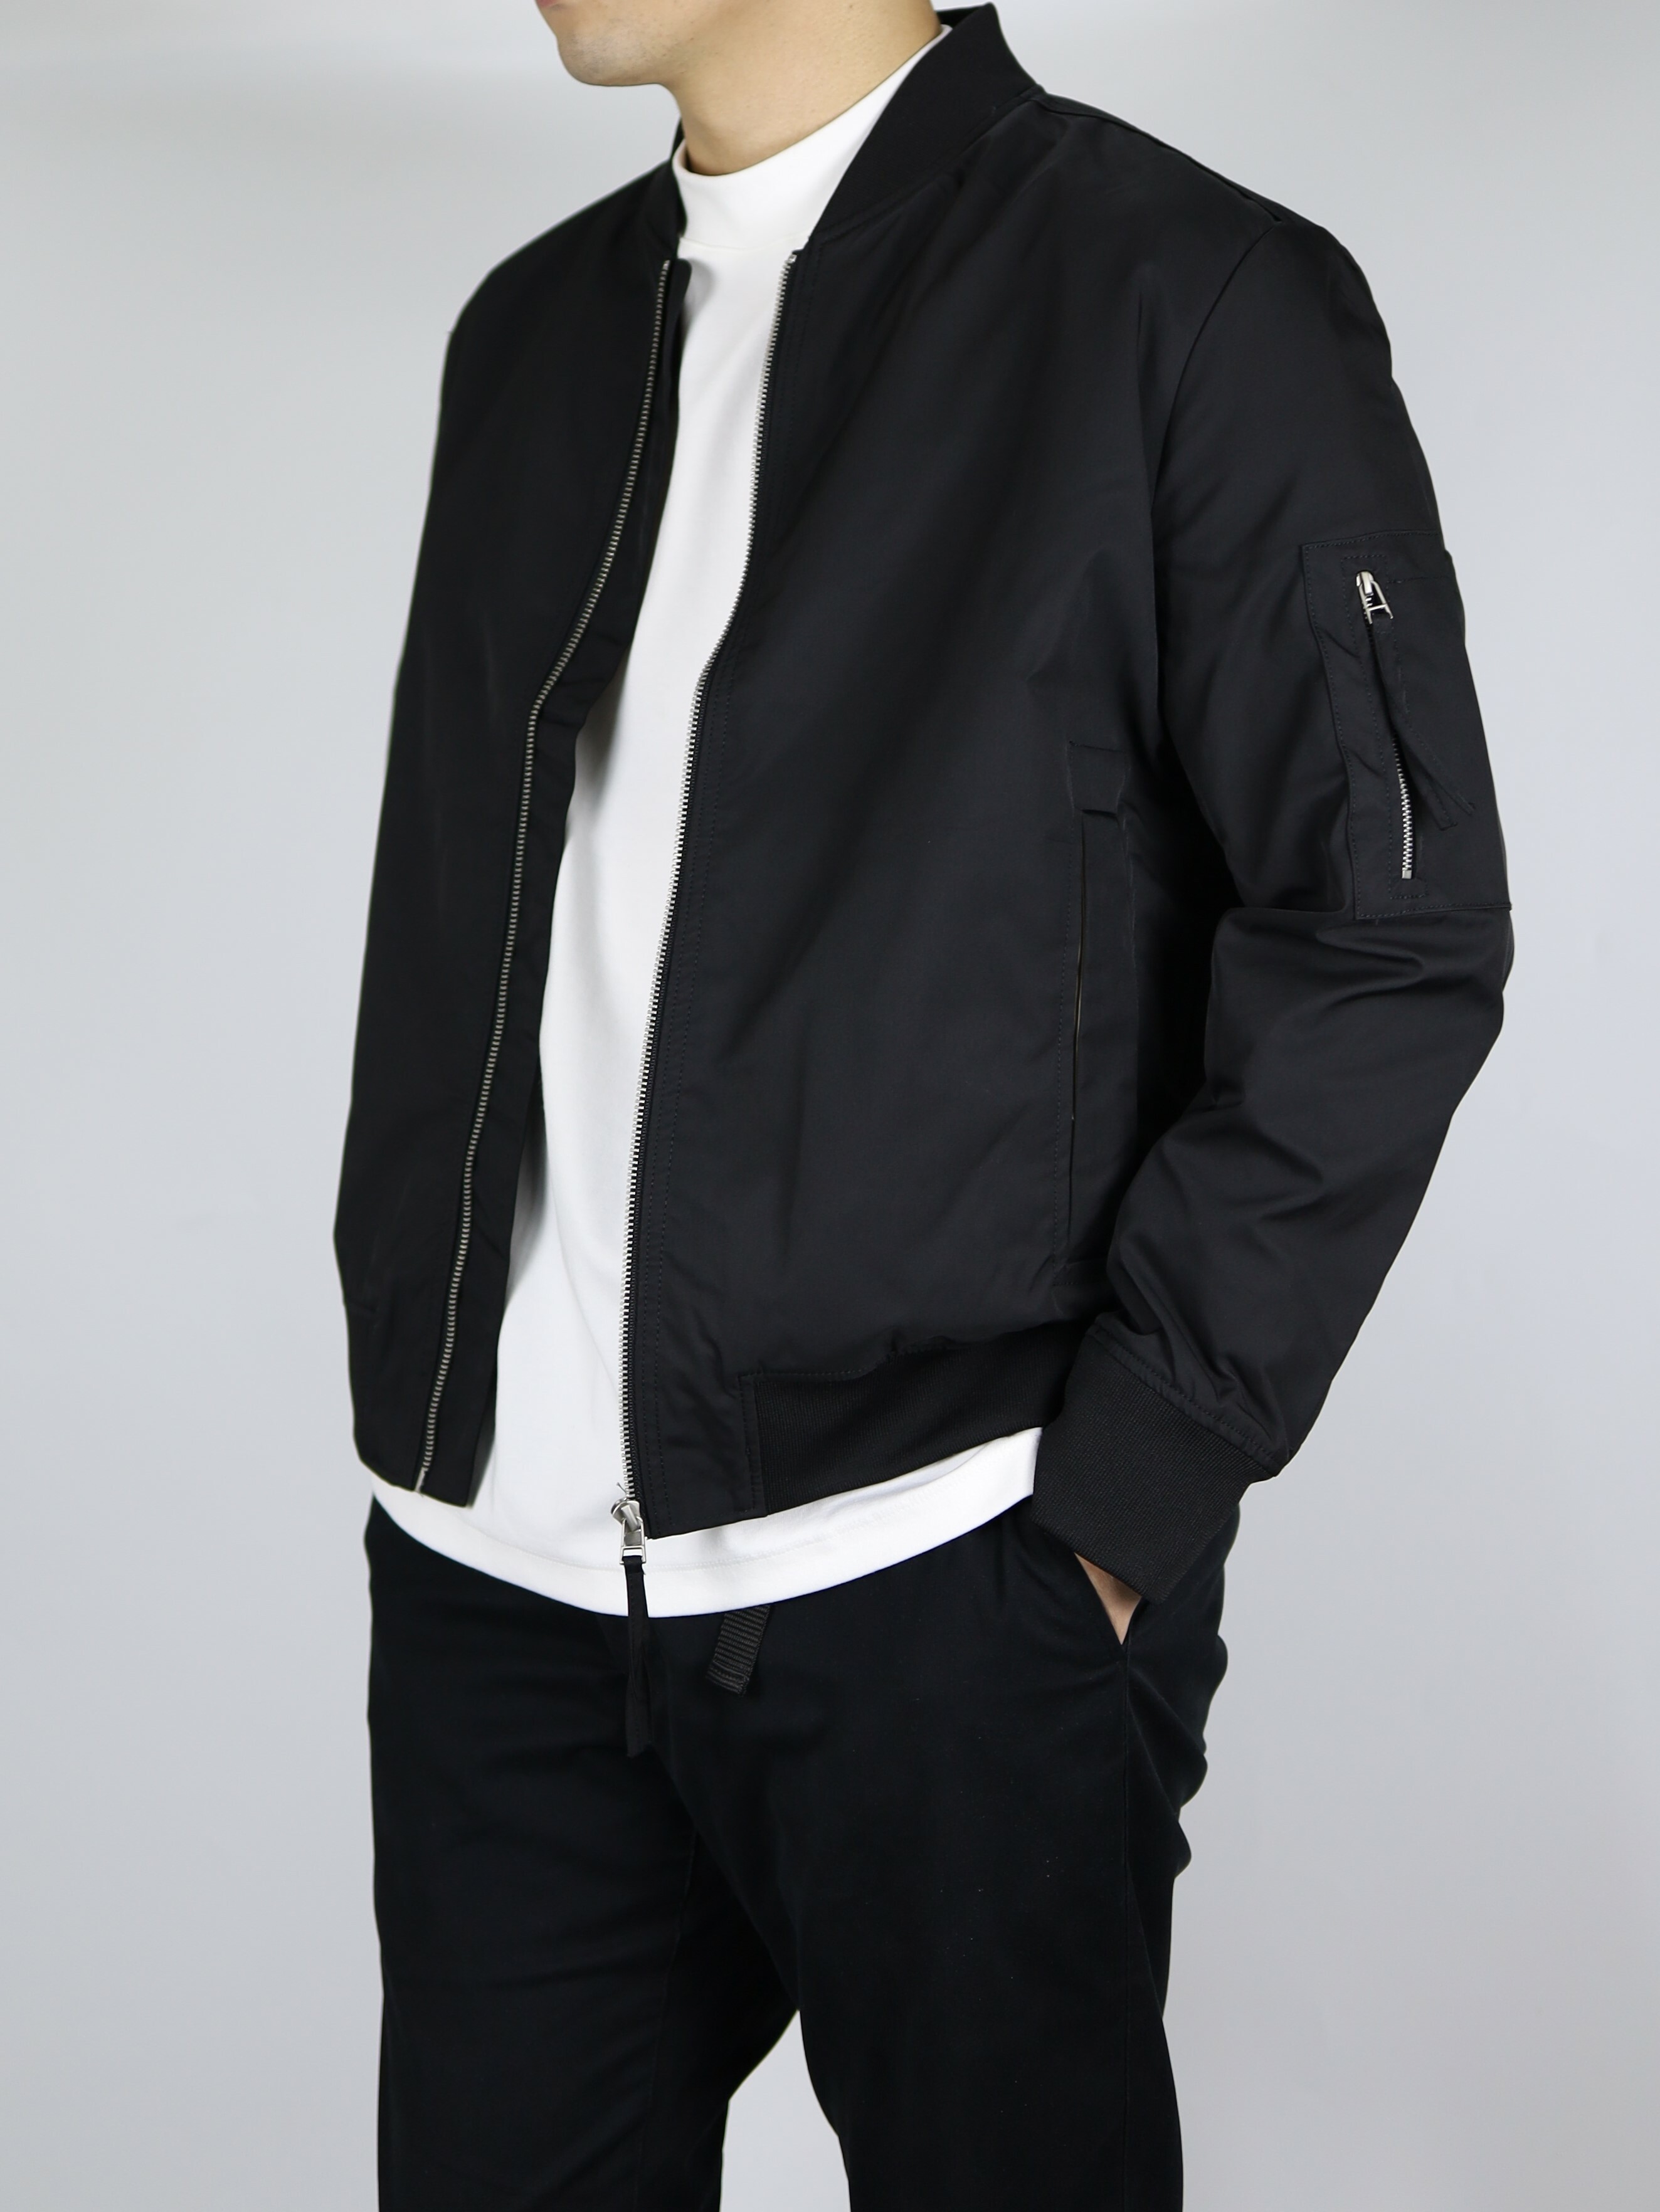 MNL MA-1 Bomber Jacket in Black